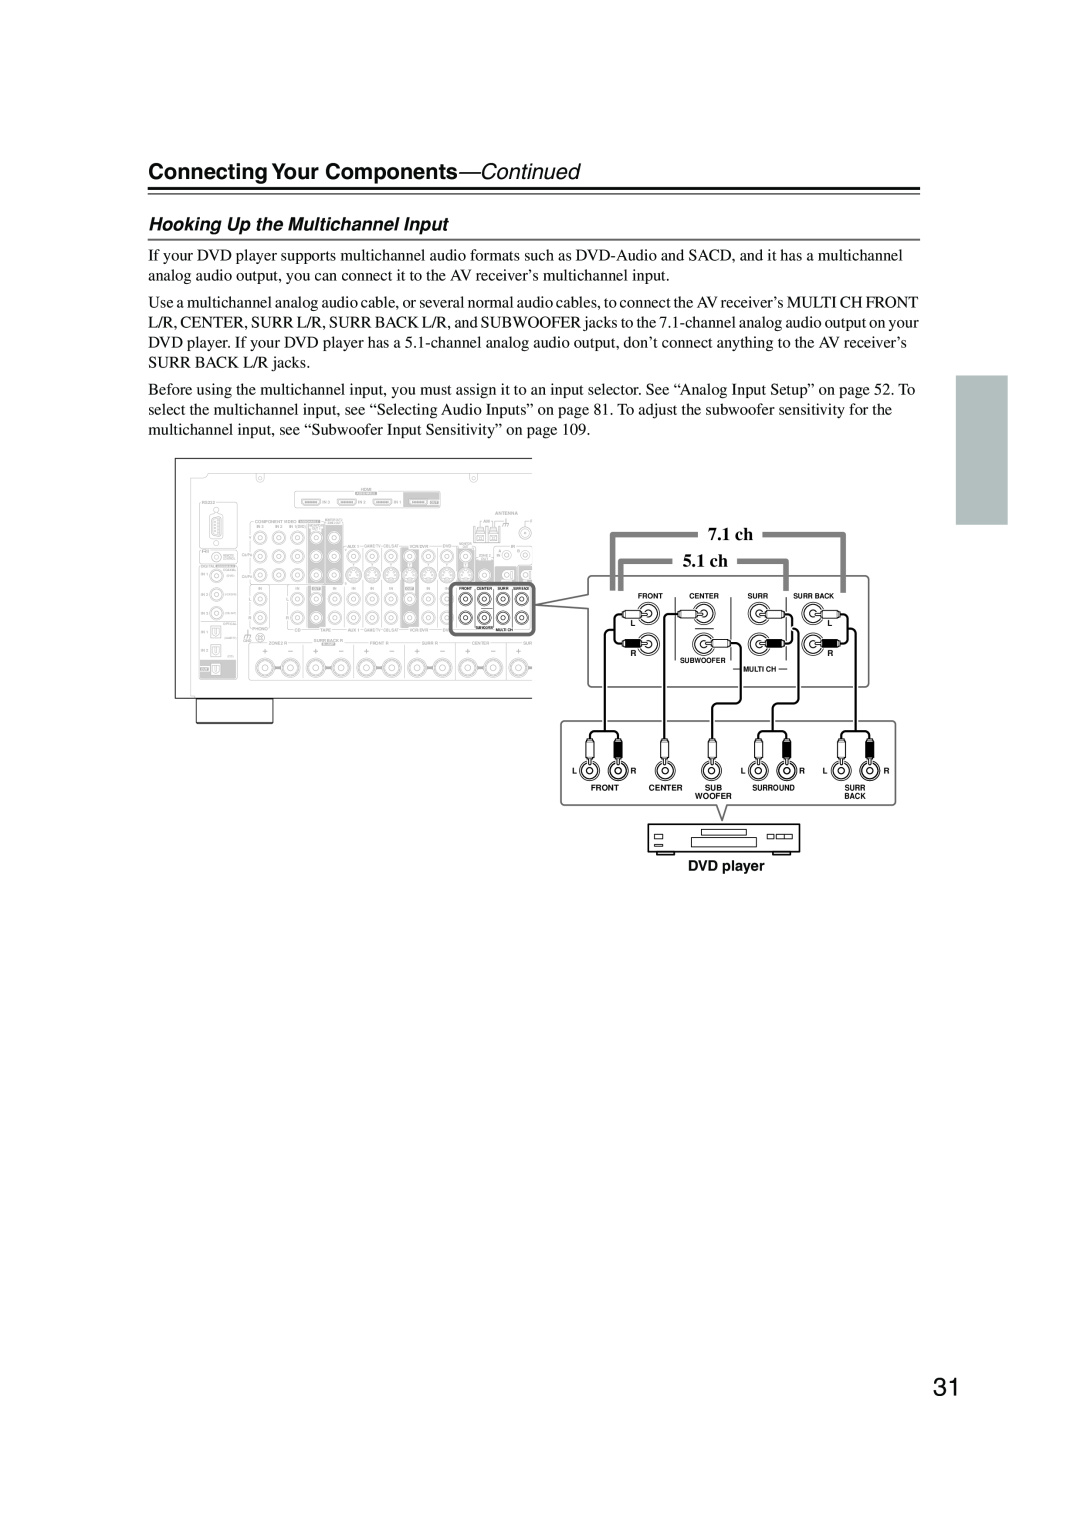 Integra DTR-7.8 instruction manual Hooking Up the Multichannel Input, Connecting Your Components—Continued, 7.1 ch, 5.1 ch 